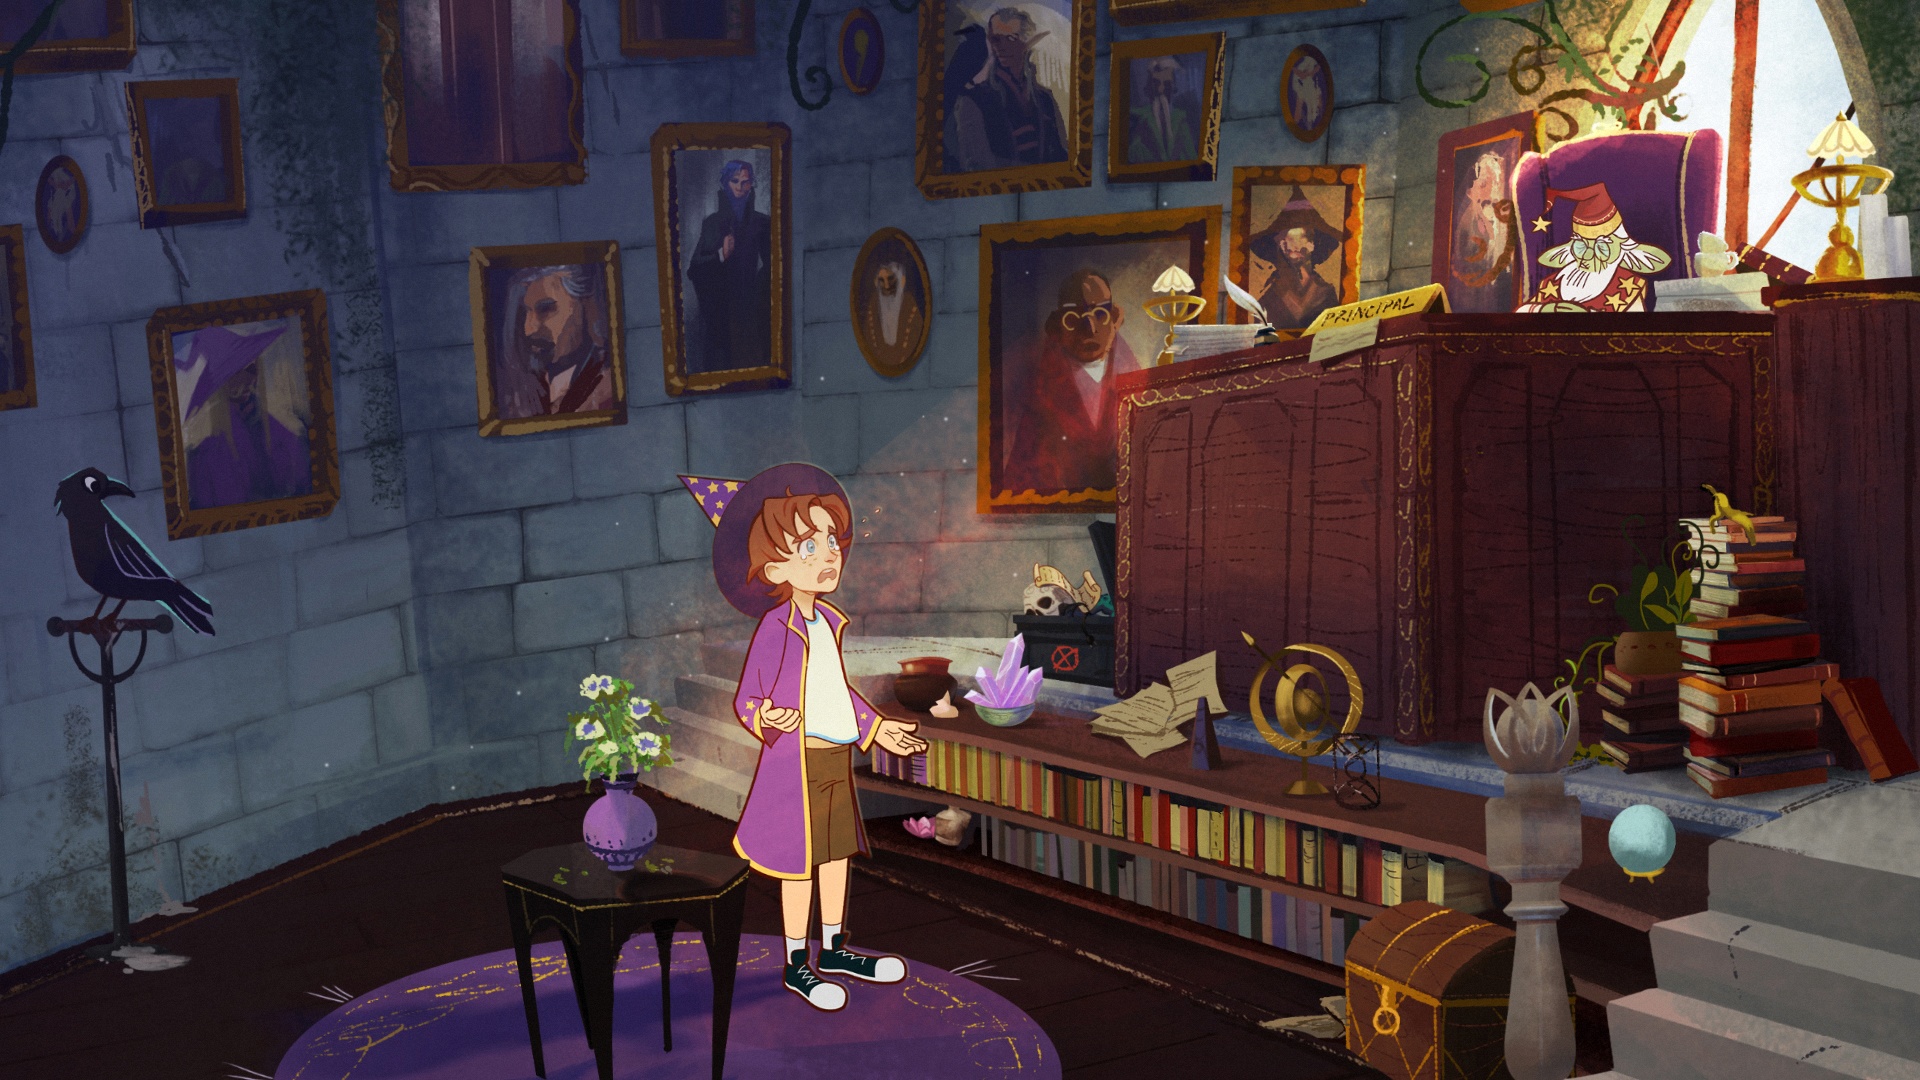 (Is it you, Dumbledore? Of course, the game also takes pop culture to task, here the headmaster of Hogwarts.)